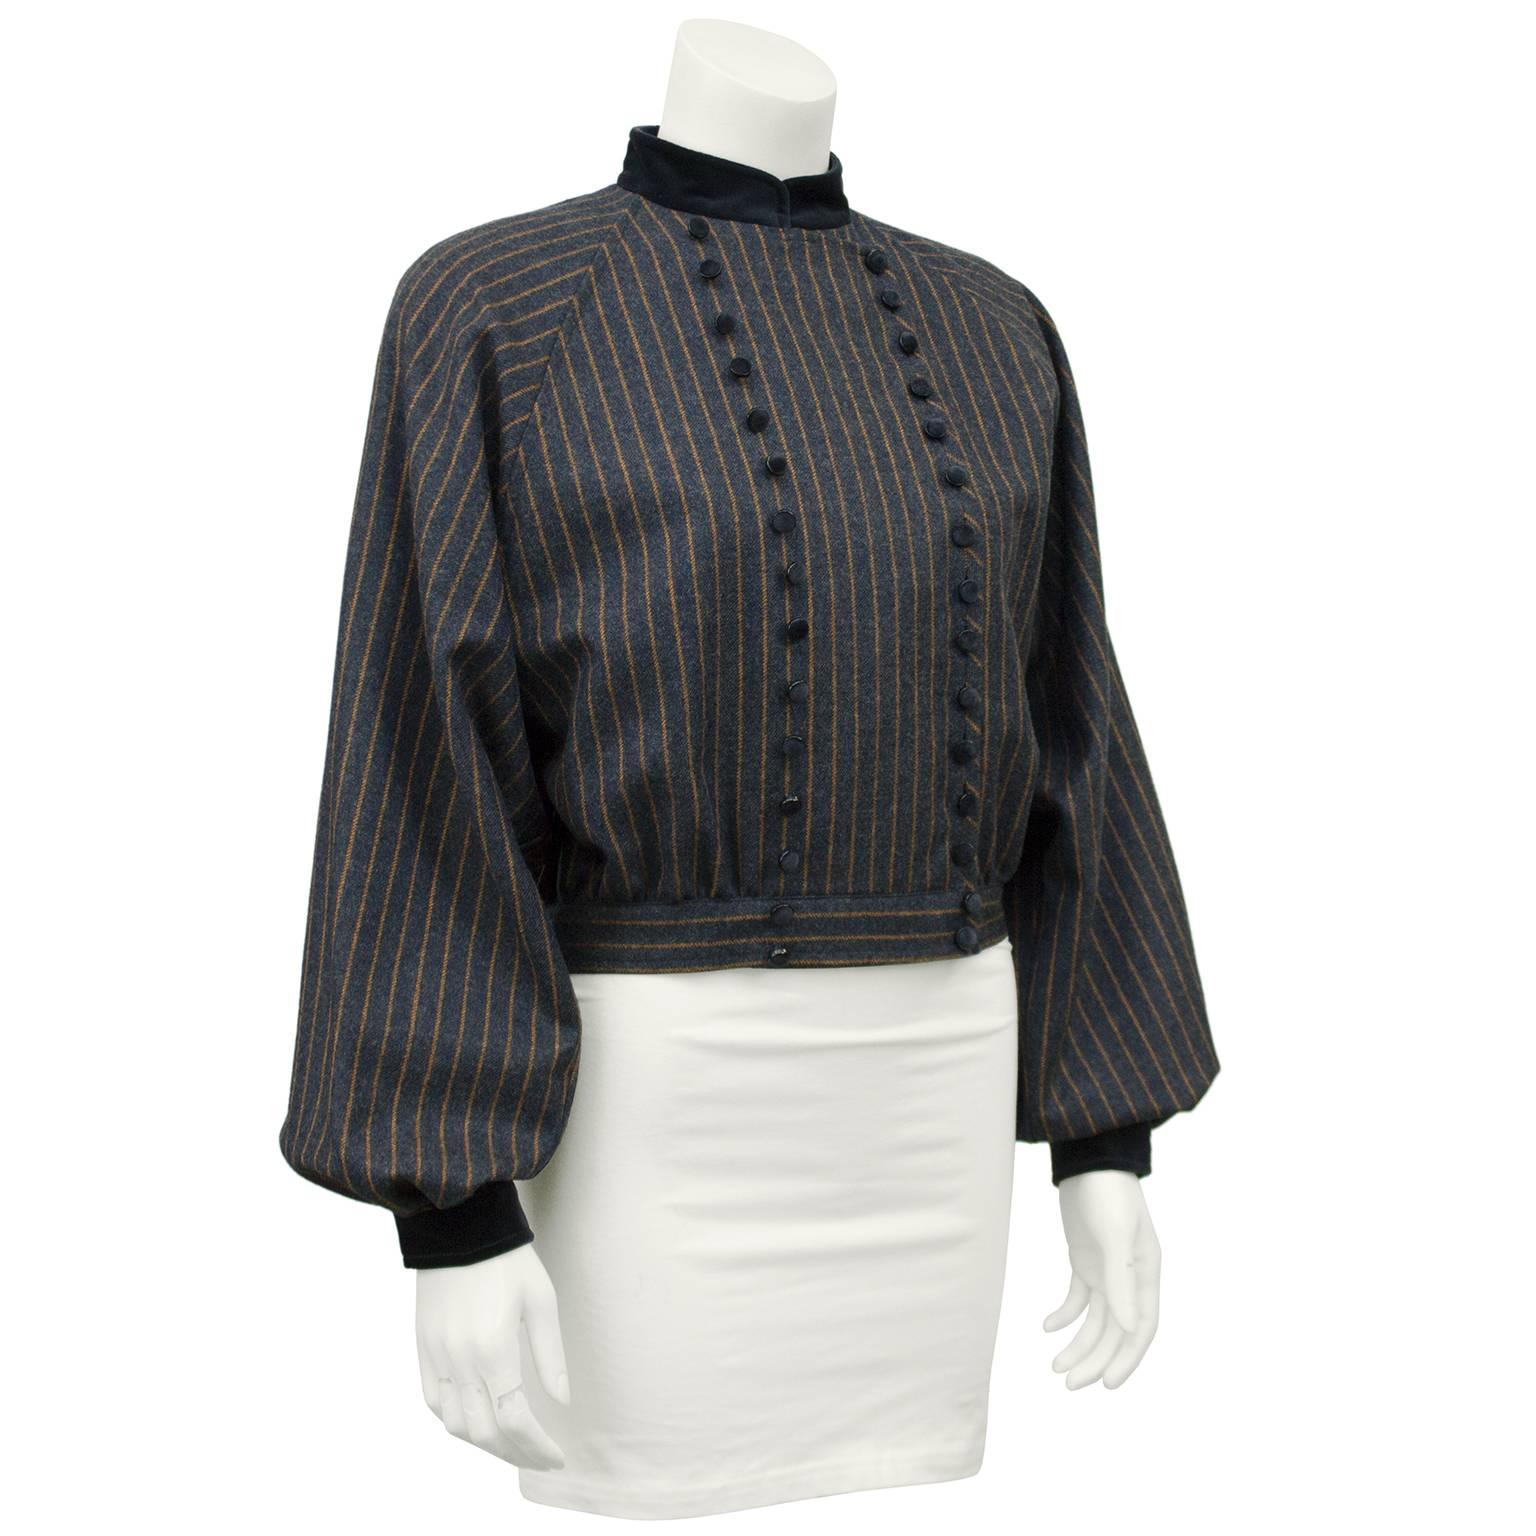 Valentino 1980s cropped wool military style jacket with velvet trim. The jacket has batwing style sleeves and is very full through the body with a fitted waistband. The wool fabric has an orange pinstripe throughout and fastens up the front with 15